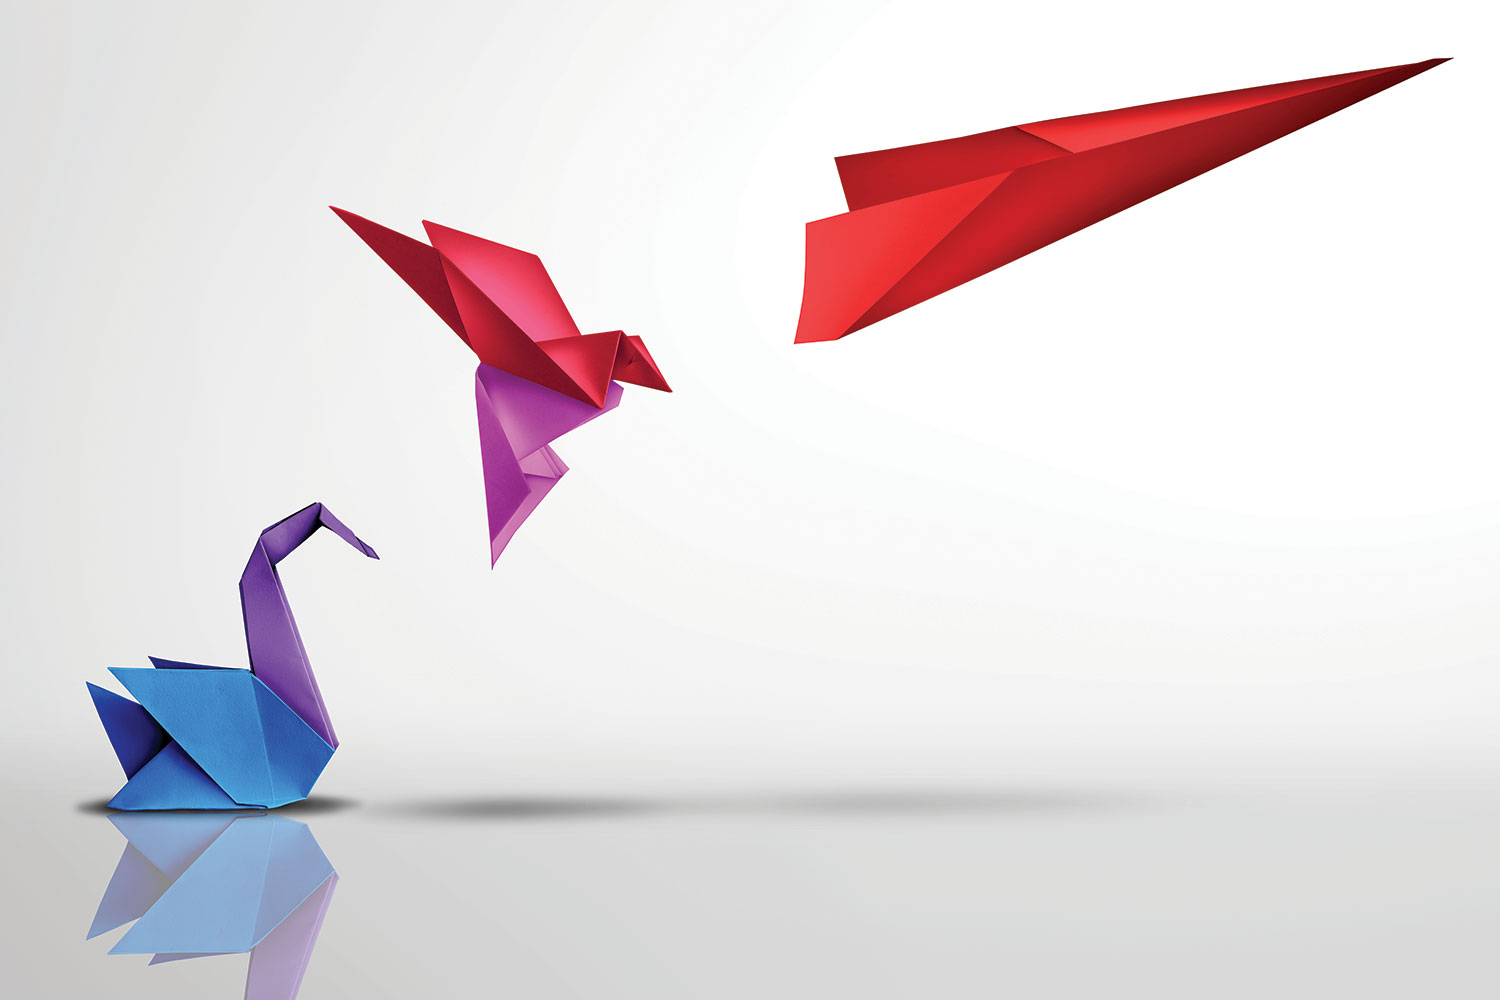 photo of colourful origami waterbird evolving upwards into a flying bird and red dart-like paper aeroplane